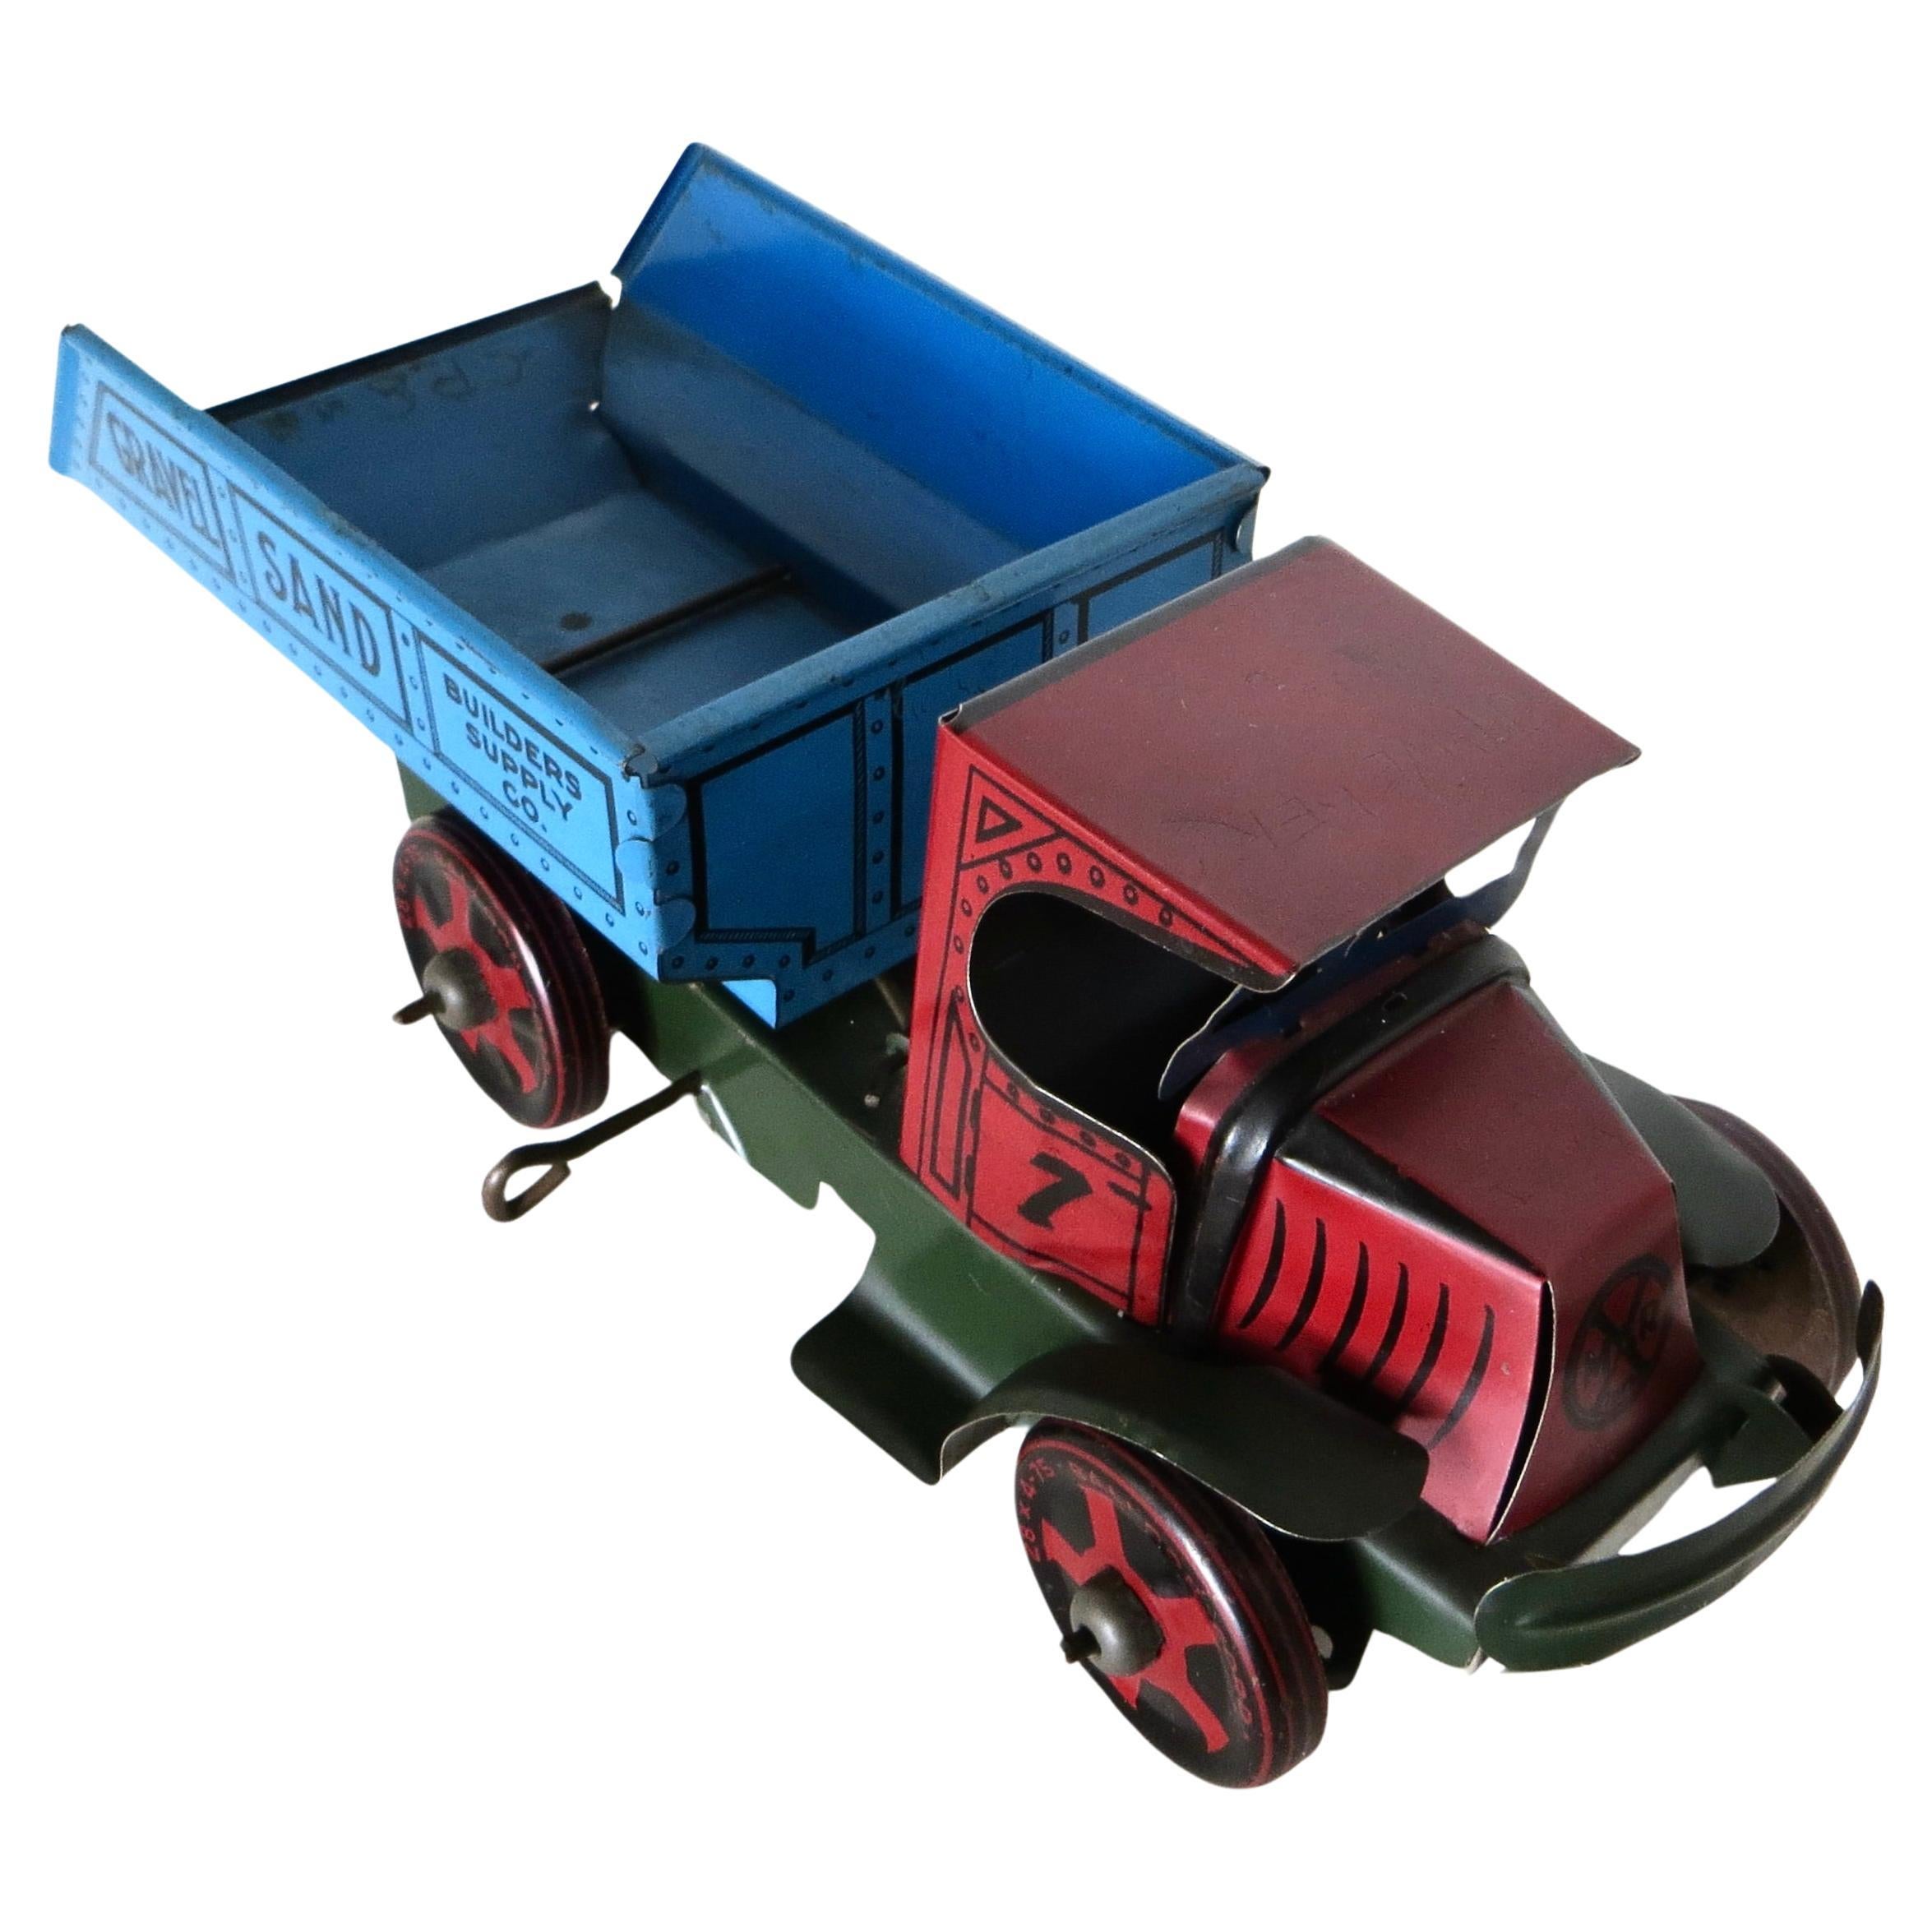 Vintage Toy Wind-Up Dump Truck by The Marx Toy Company, N.Y. American Circa 1930 For Sale